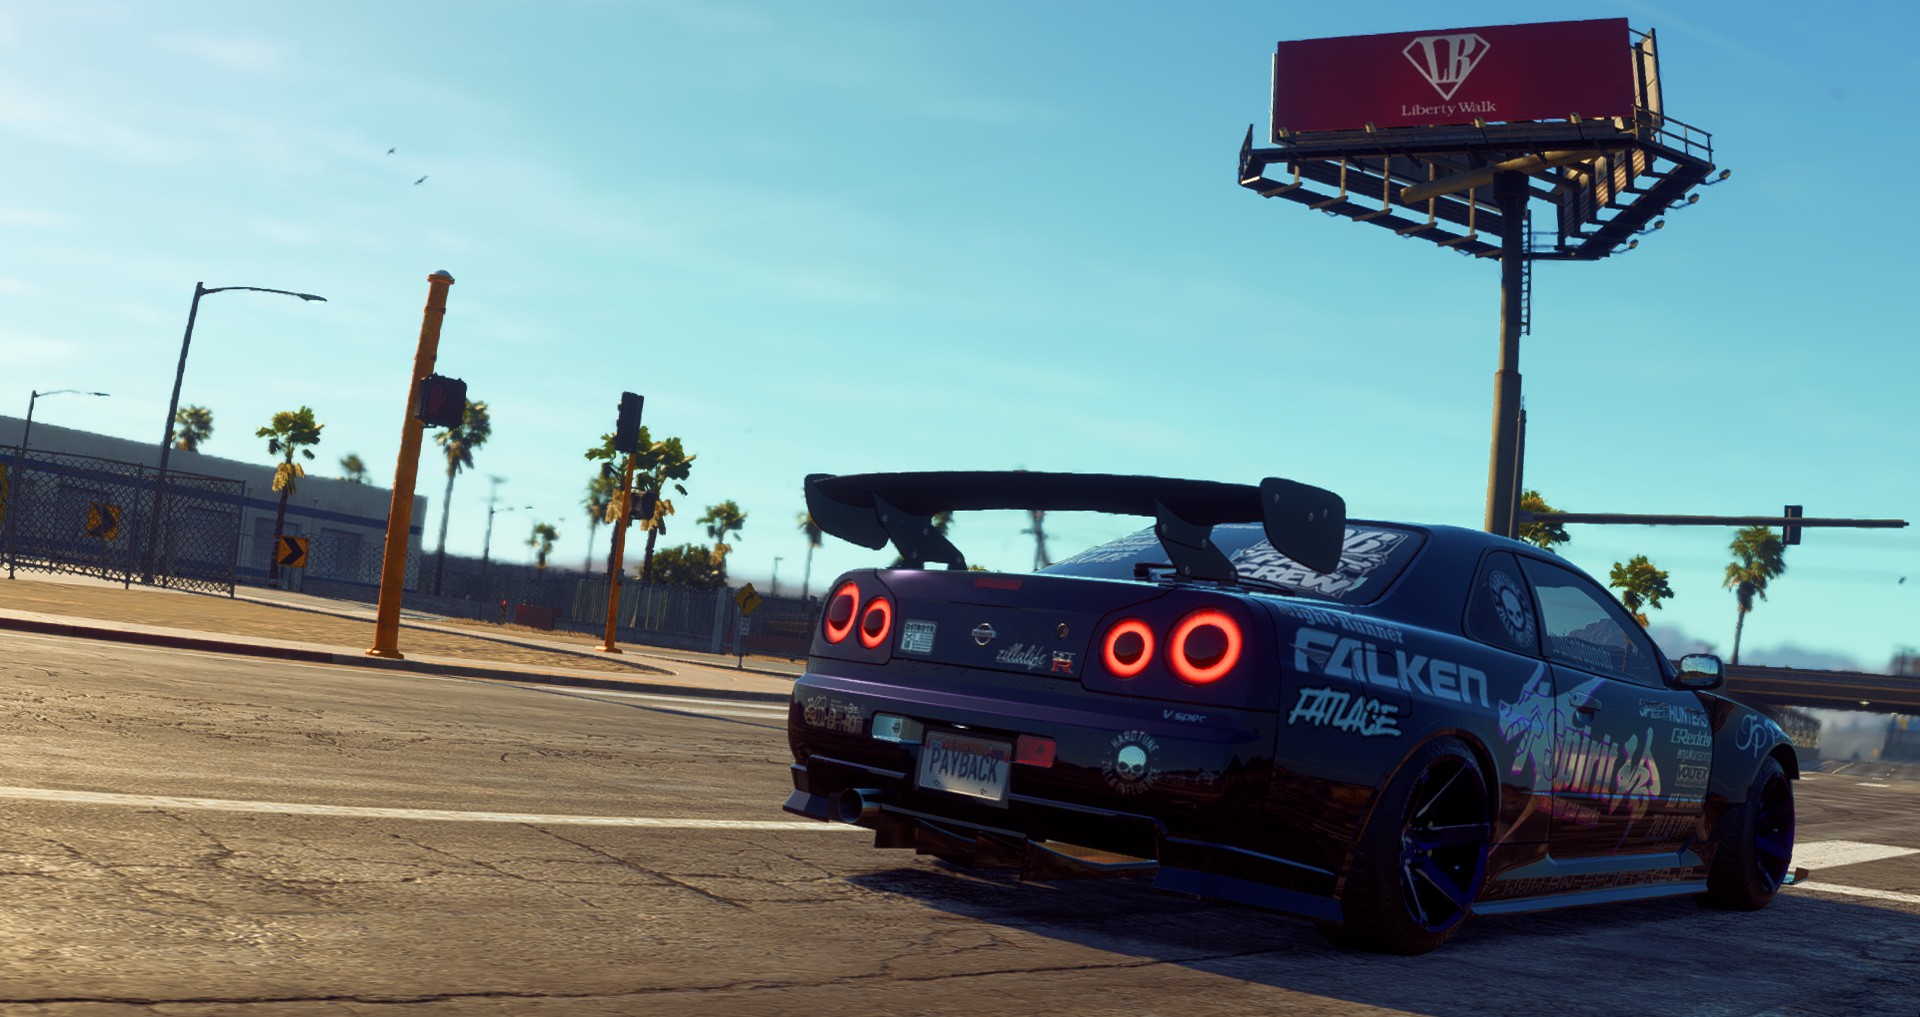 General 1920x1017 Need for Speed Need for Speed Payback screen shot Nissan Skyline R34 Nissan Skyline Nissan car video games